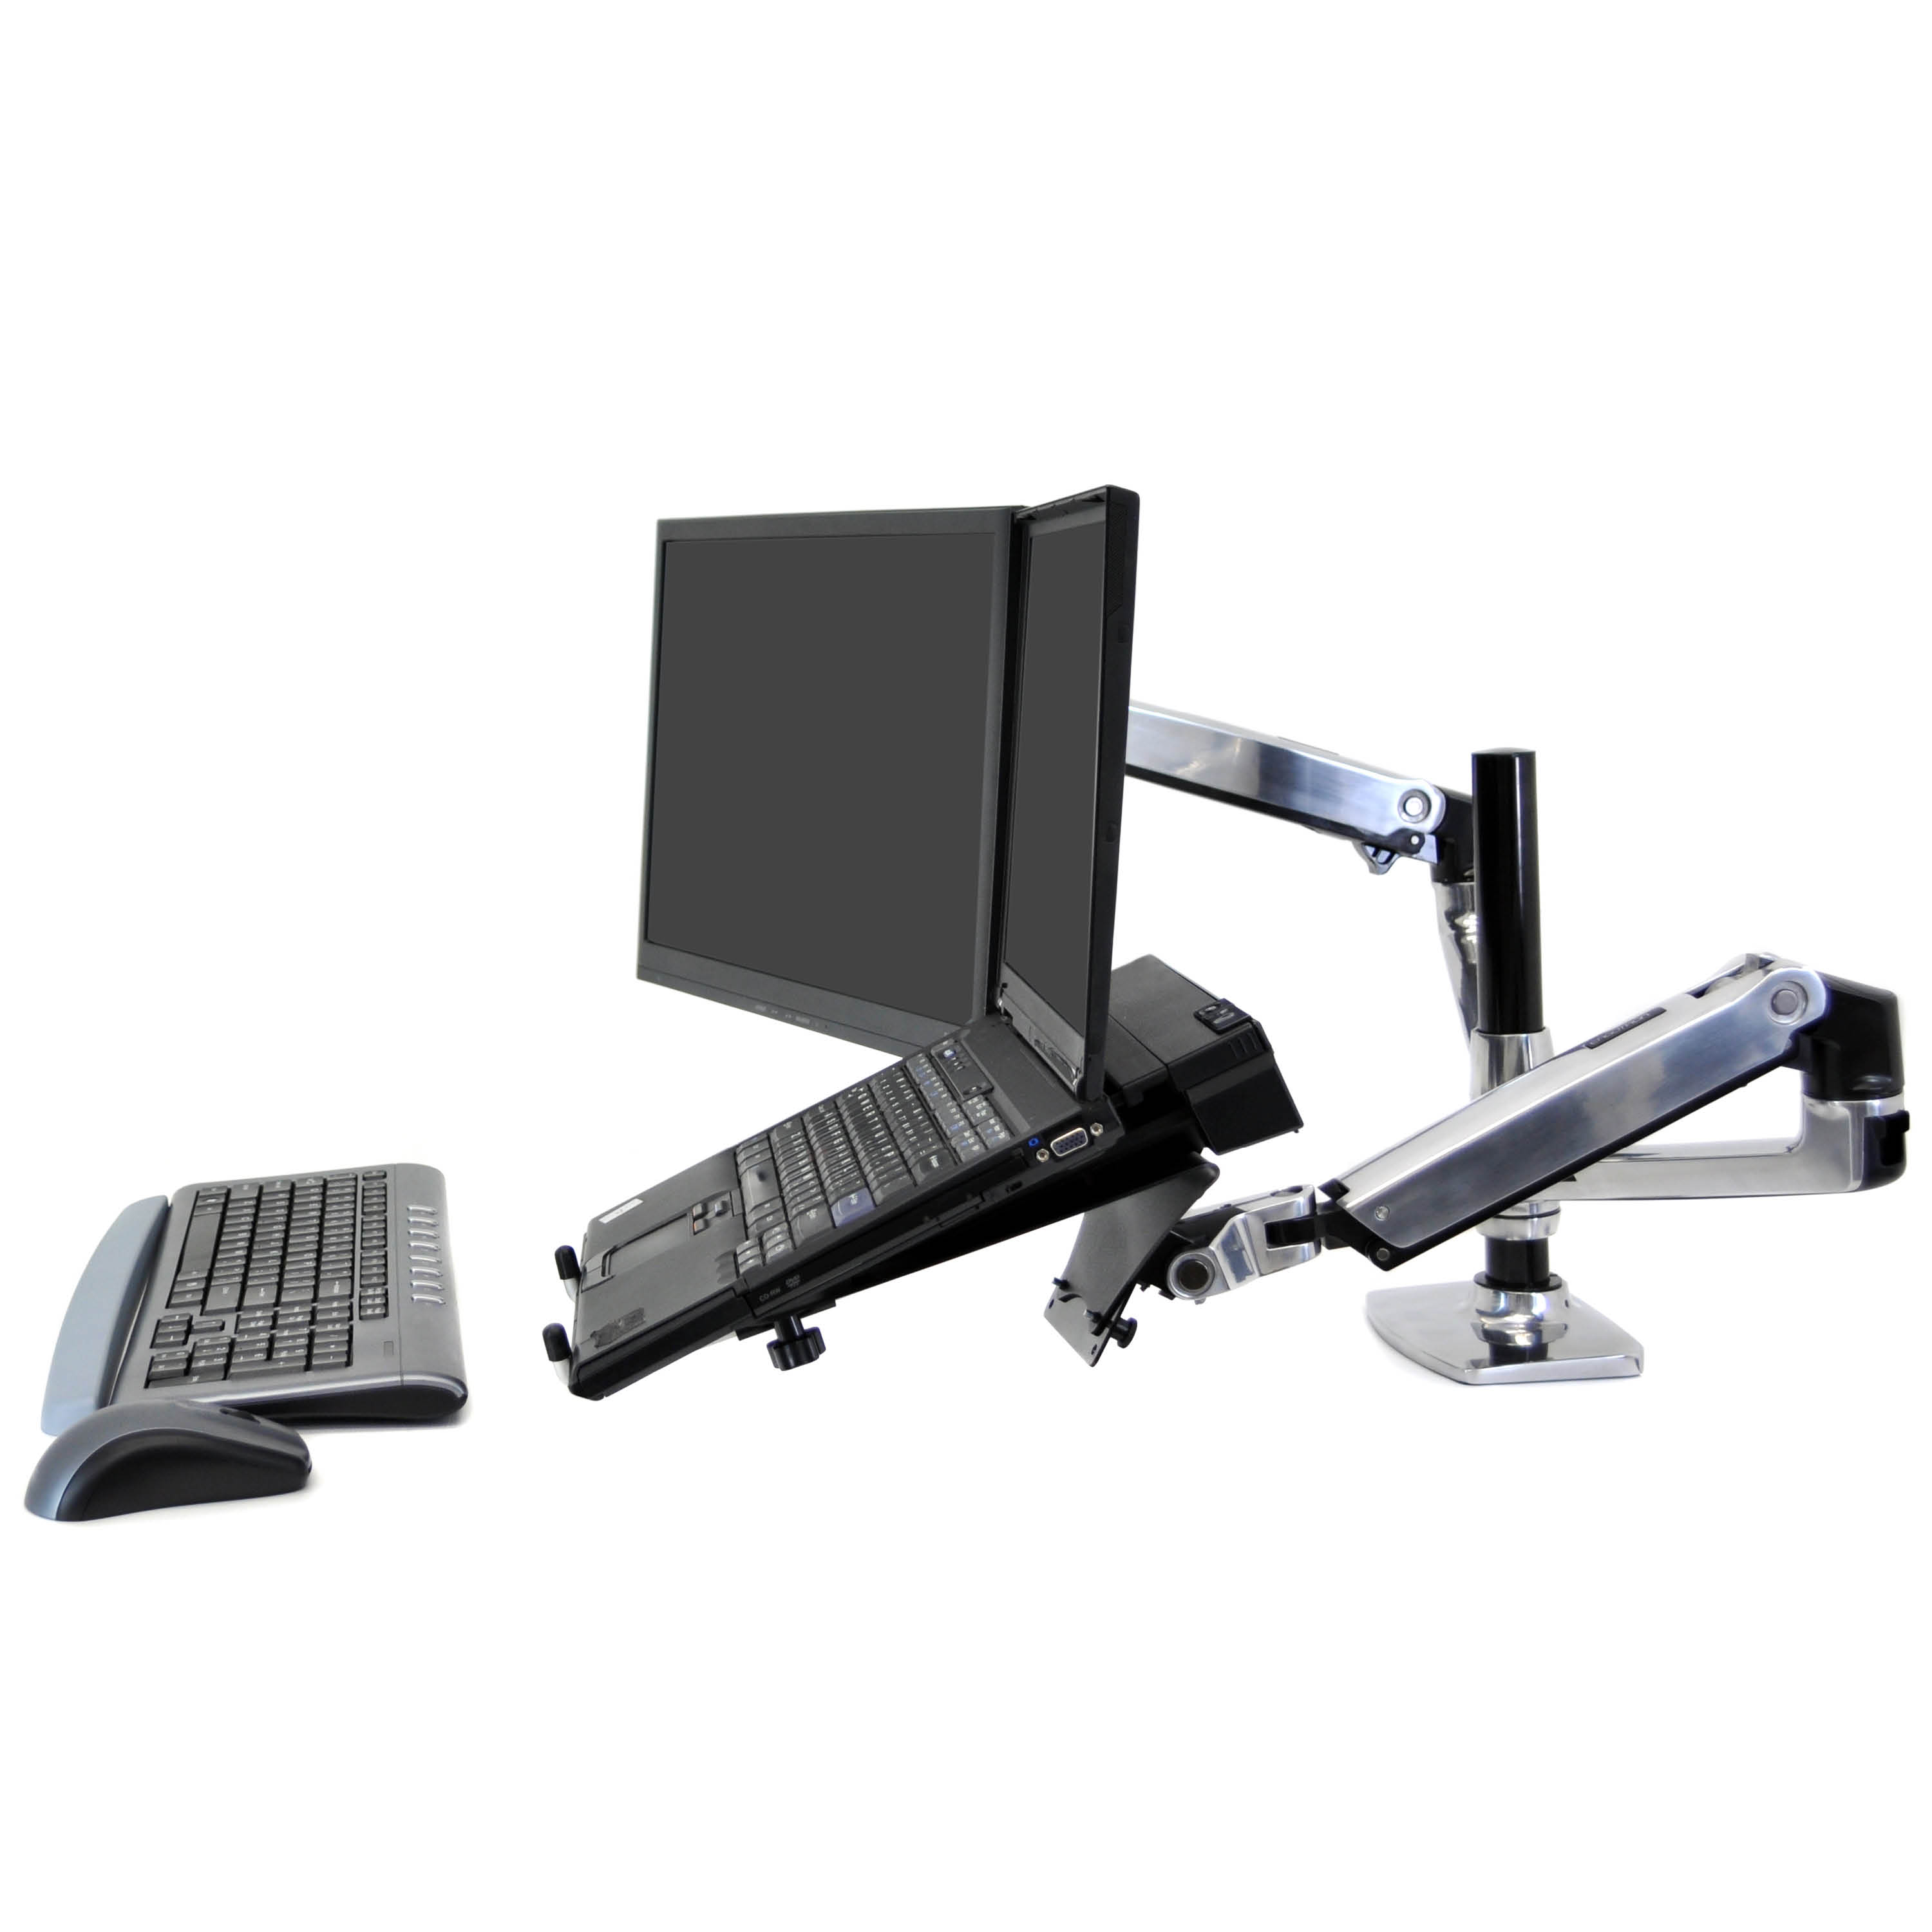 for 2 Monitors Up to 40 Inches, 7 to 22 lbs Each – Tall Pole VESA Desk Mount Ergotron Polished Aluminum LX Vertical Stacking Dual Monitor Arm 